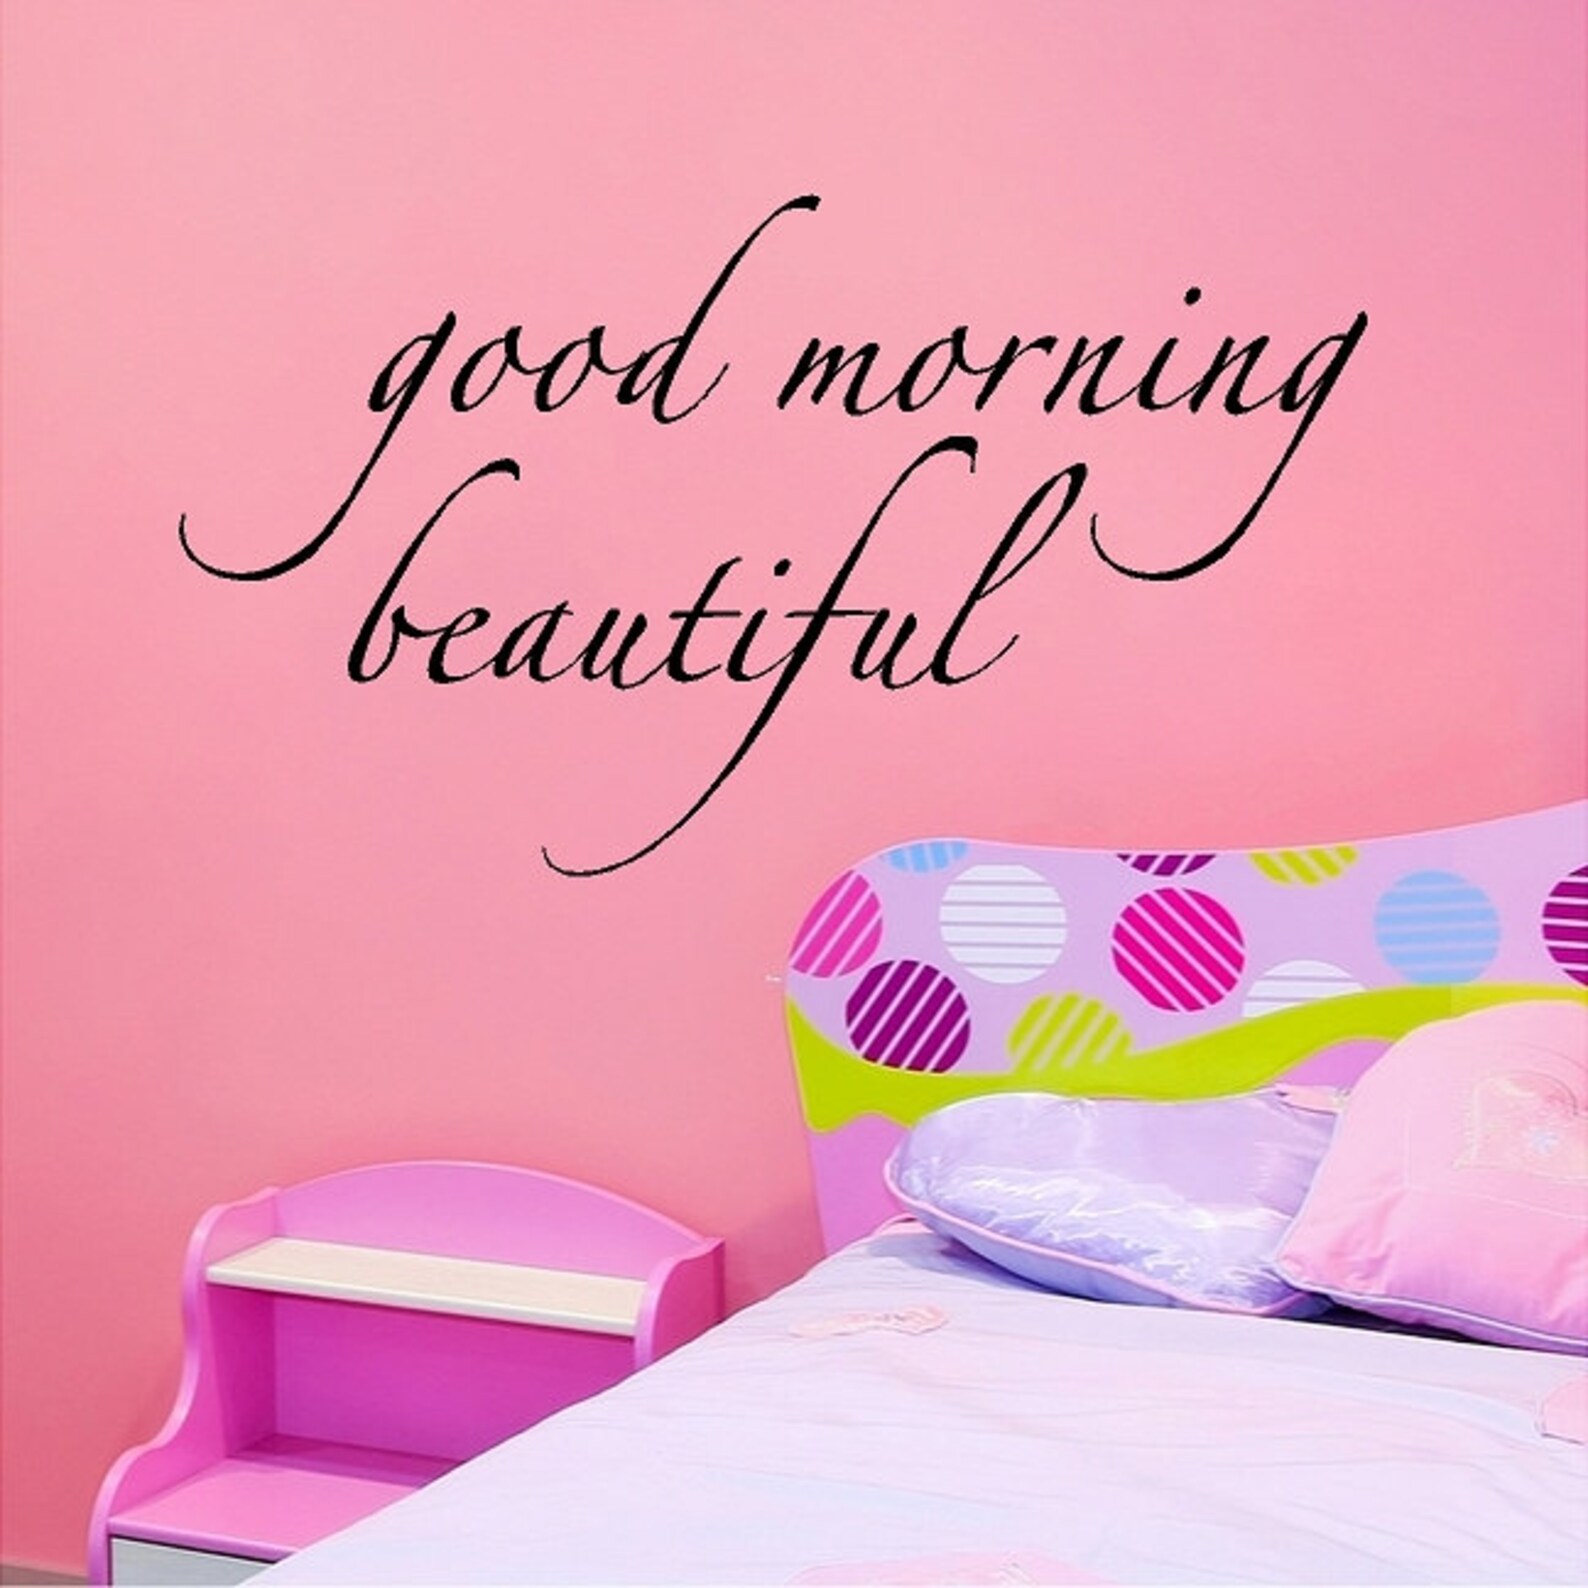 Good Morning Beautiful Wall Lettering Sayings Words Quotes - Etsy